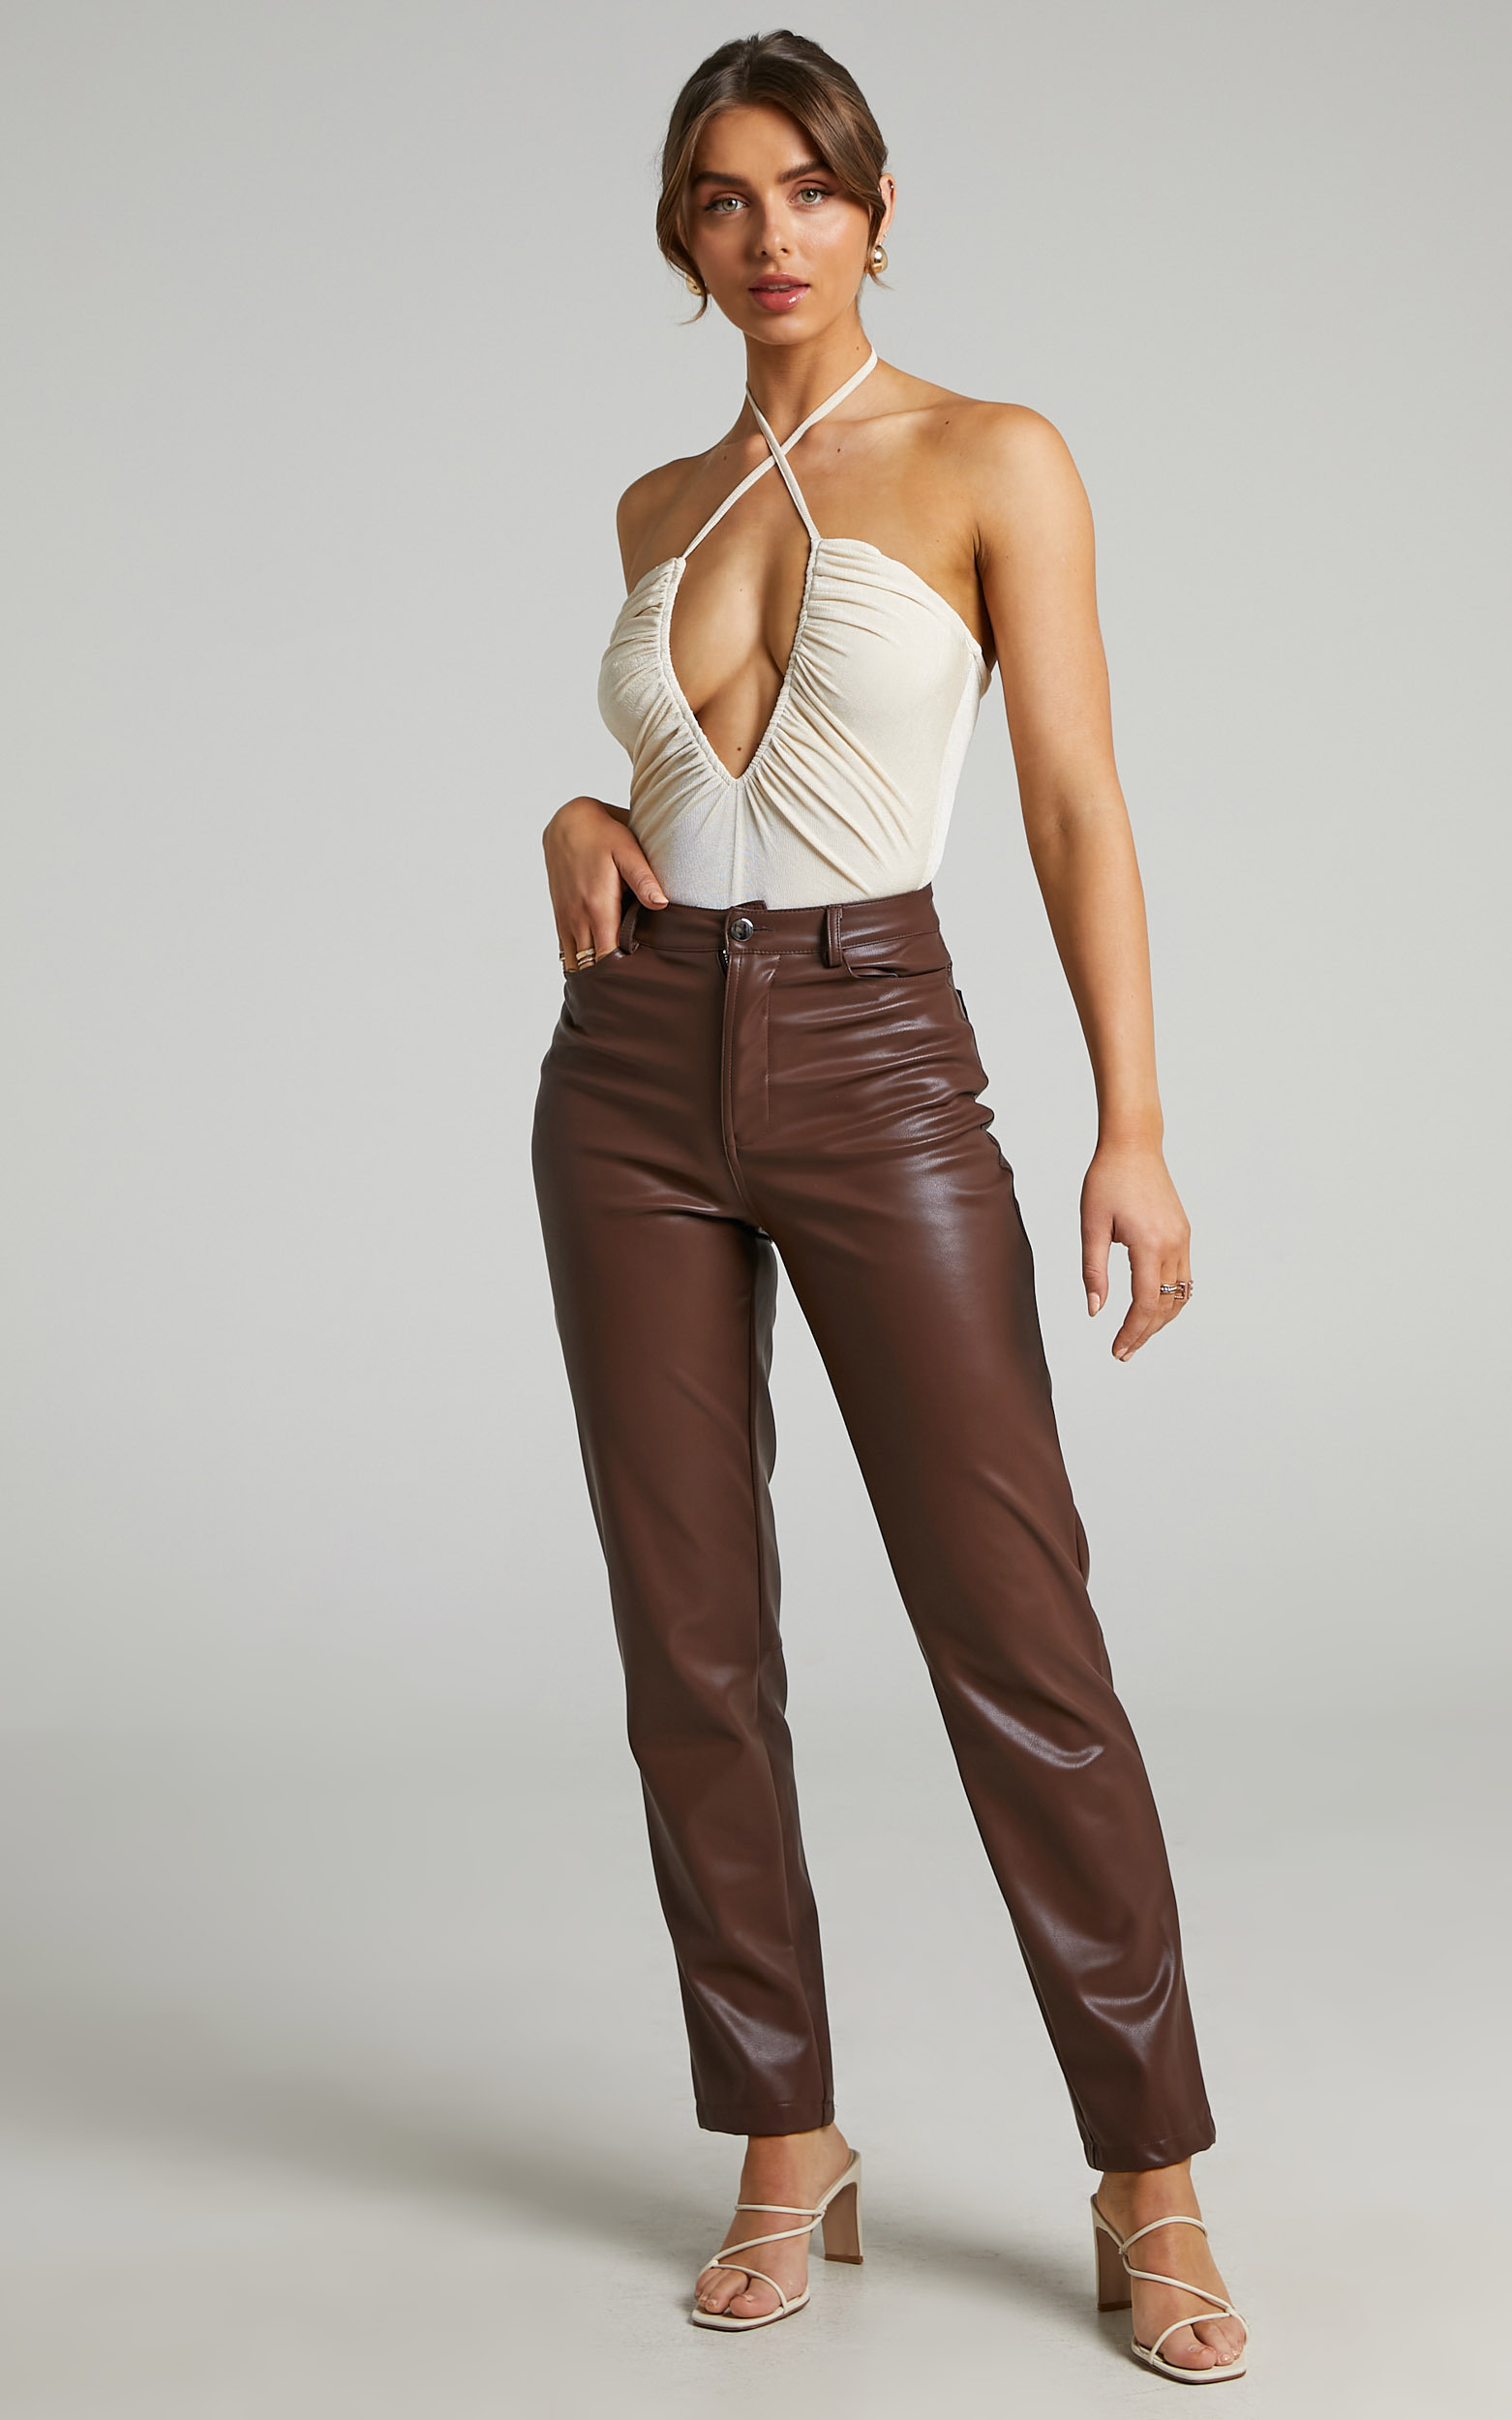 Victorie Plunge Neck Ruched Bodysuit in Cream - 06, CRE1, hi-res image number null